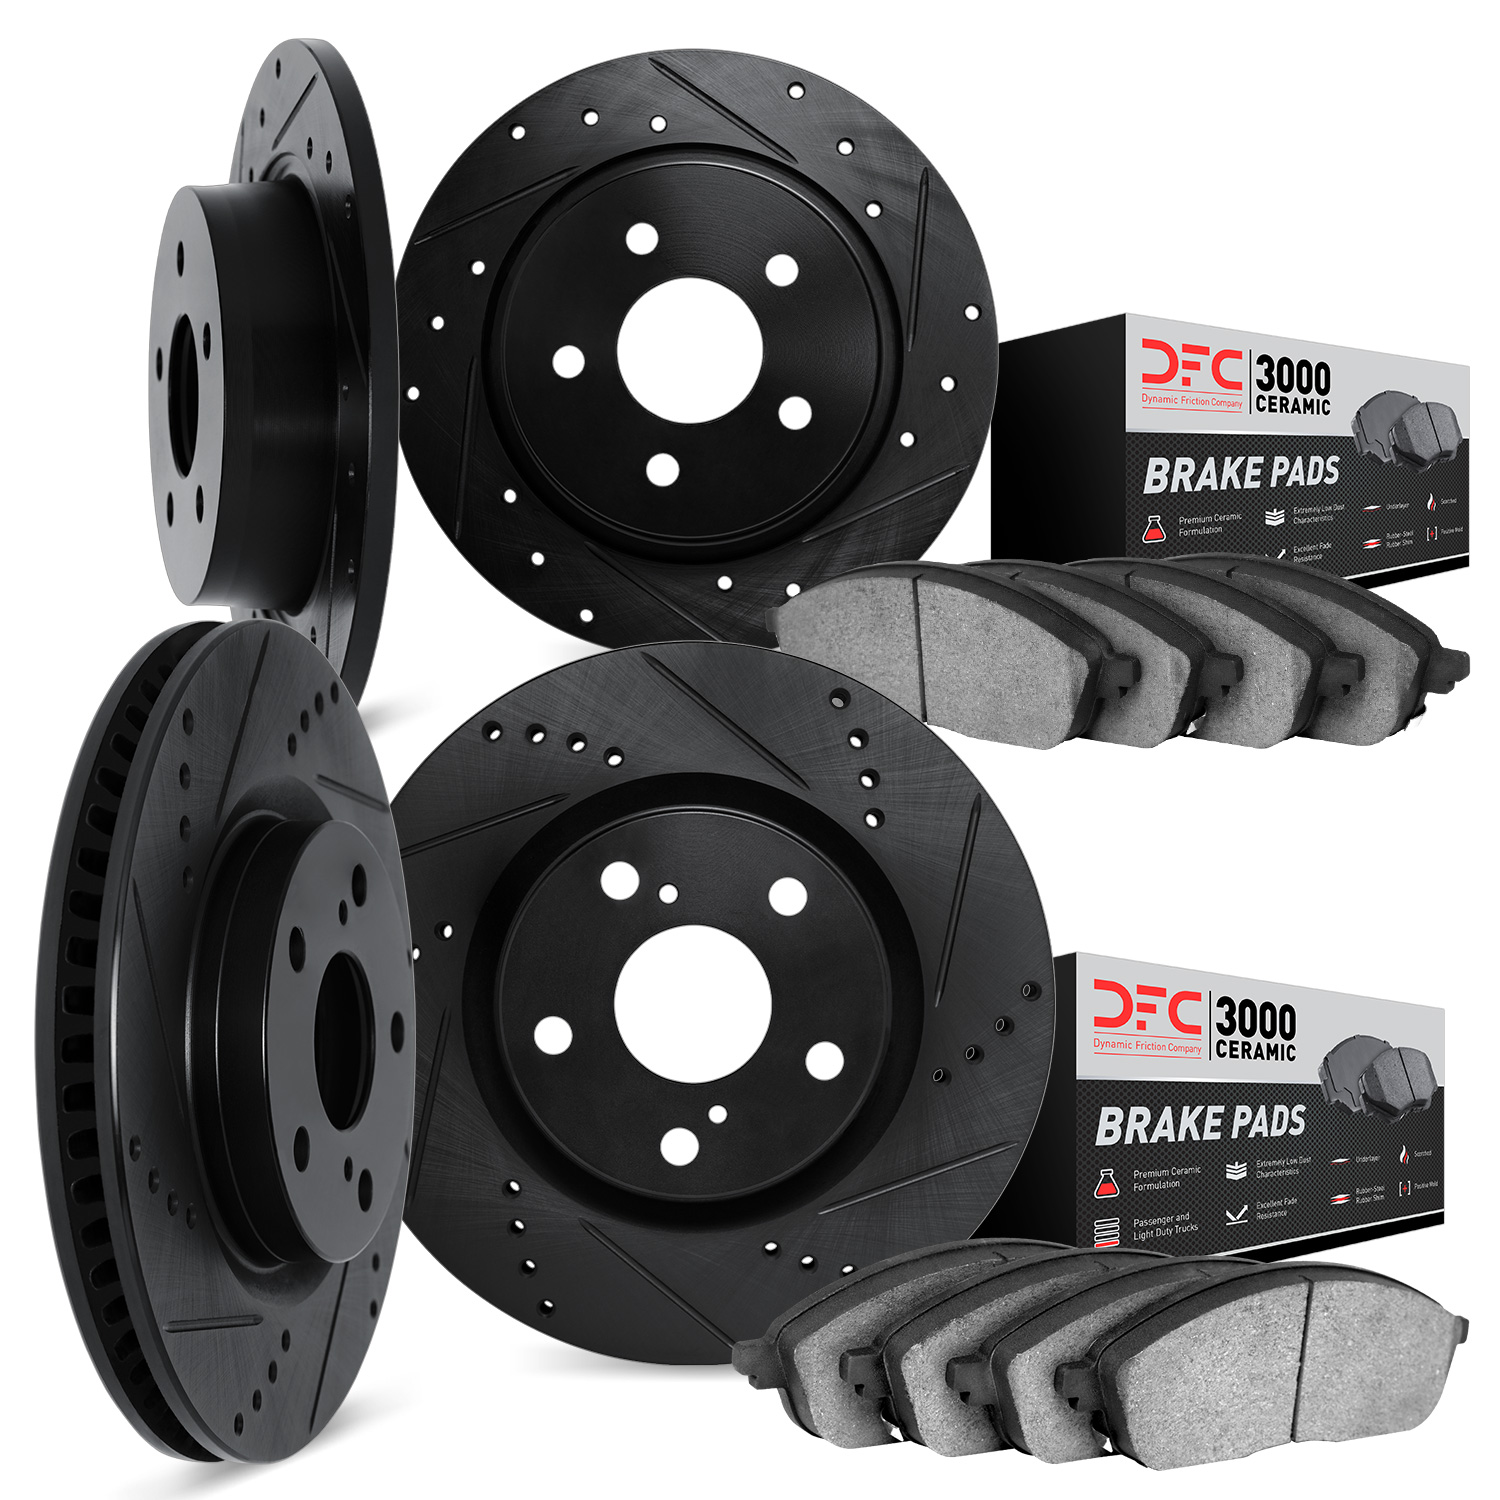 8304-59073 Drilled/Slotted Brake Rotors with 3000-Series Ceramic Brake Pads Kit [Black], 2003-2007 Acura/Honda, Position: Front